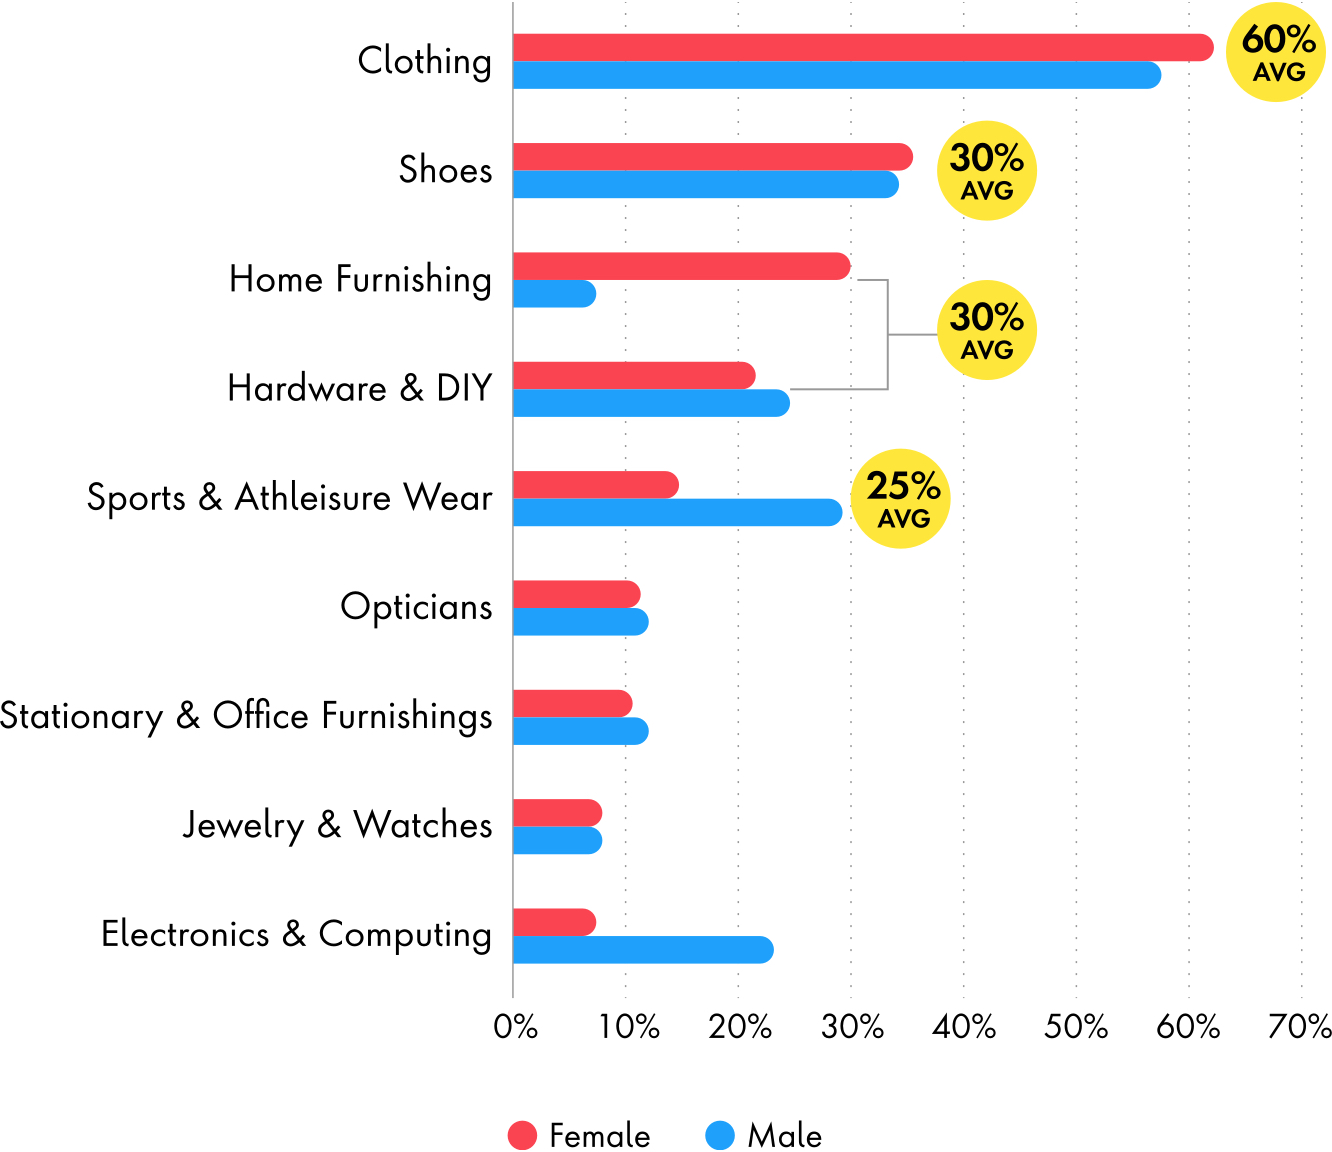 60% of shoppers on average are planning to buy clothing, 30% shoes, DIY, home furnishing, respectively. 